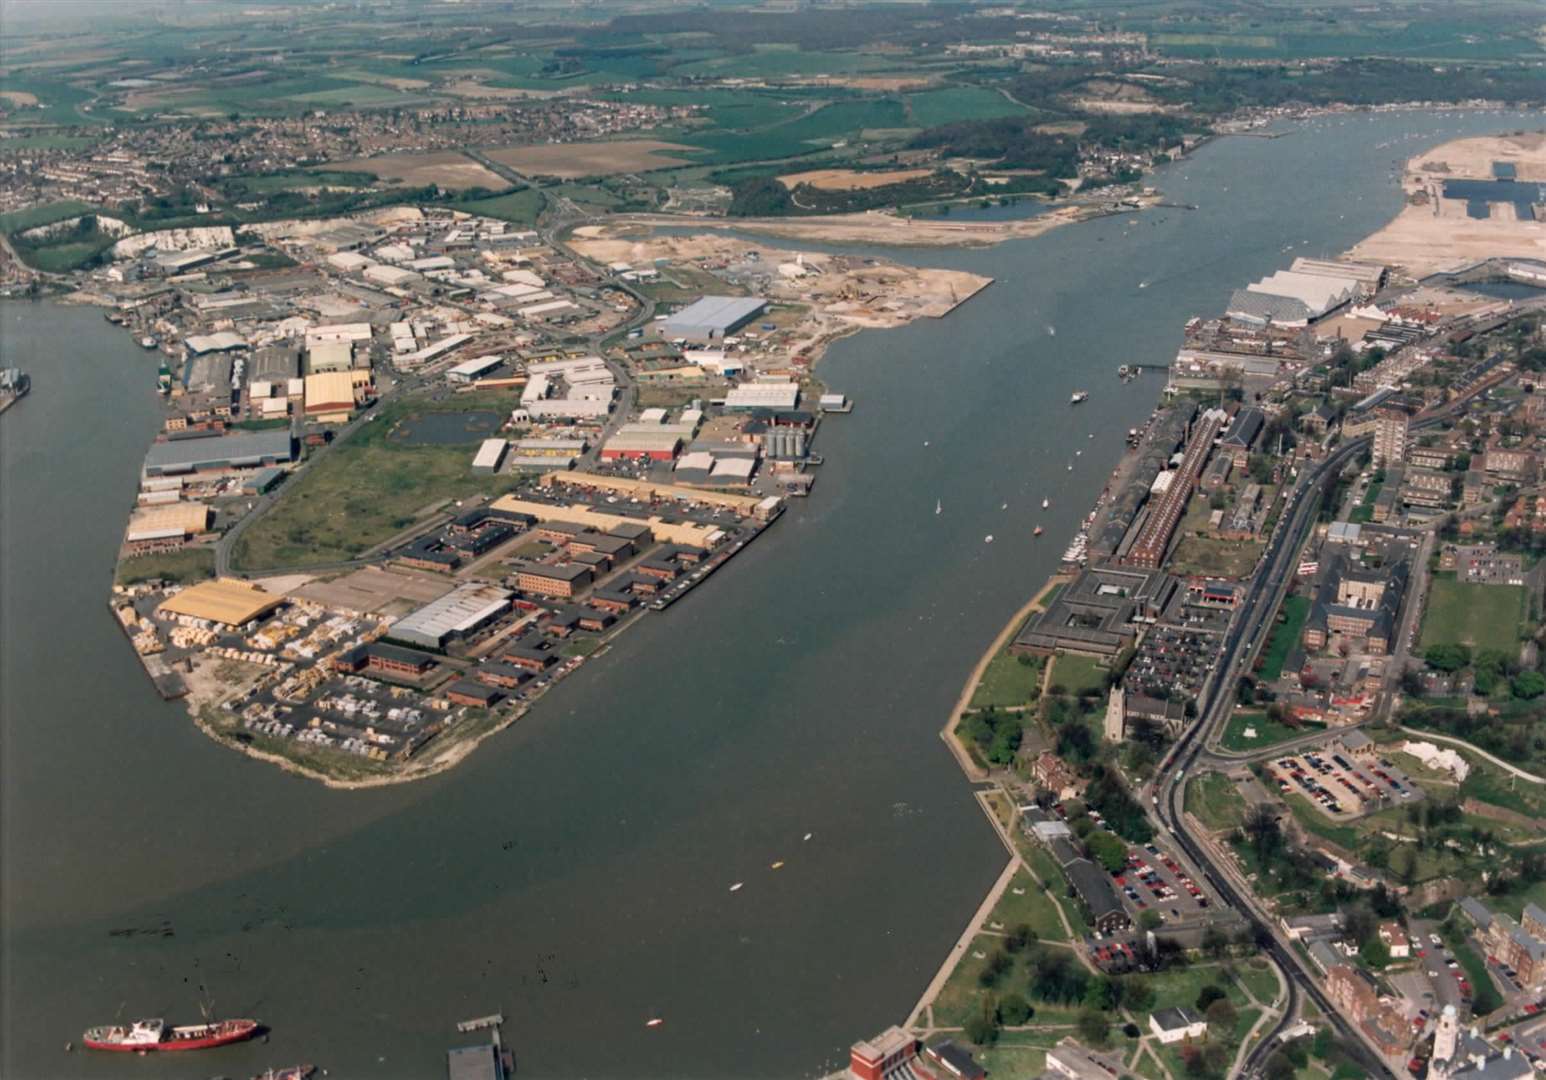 Medway City Estate, on the left, pictured in 1997